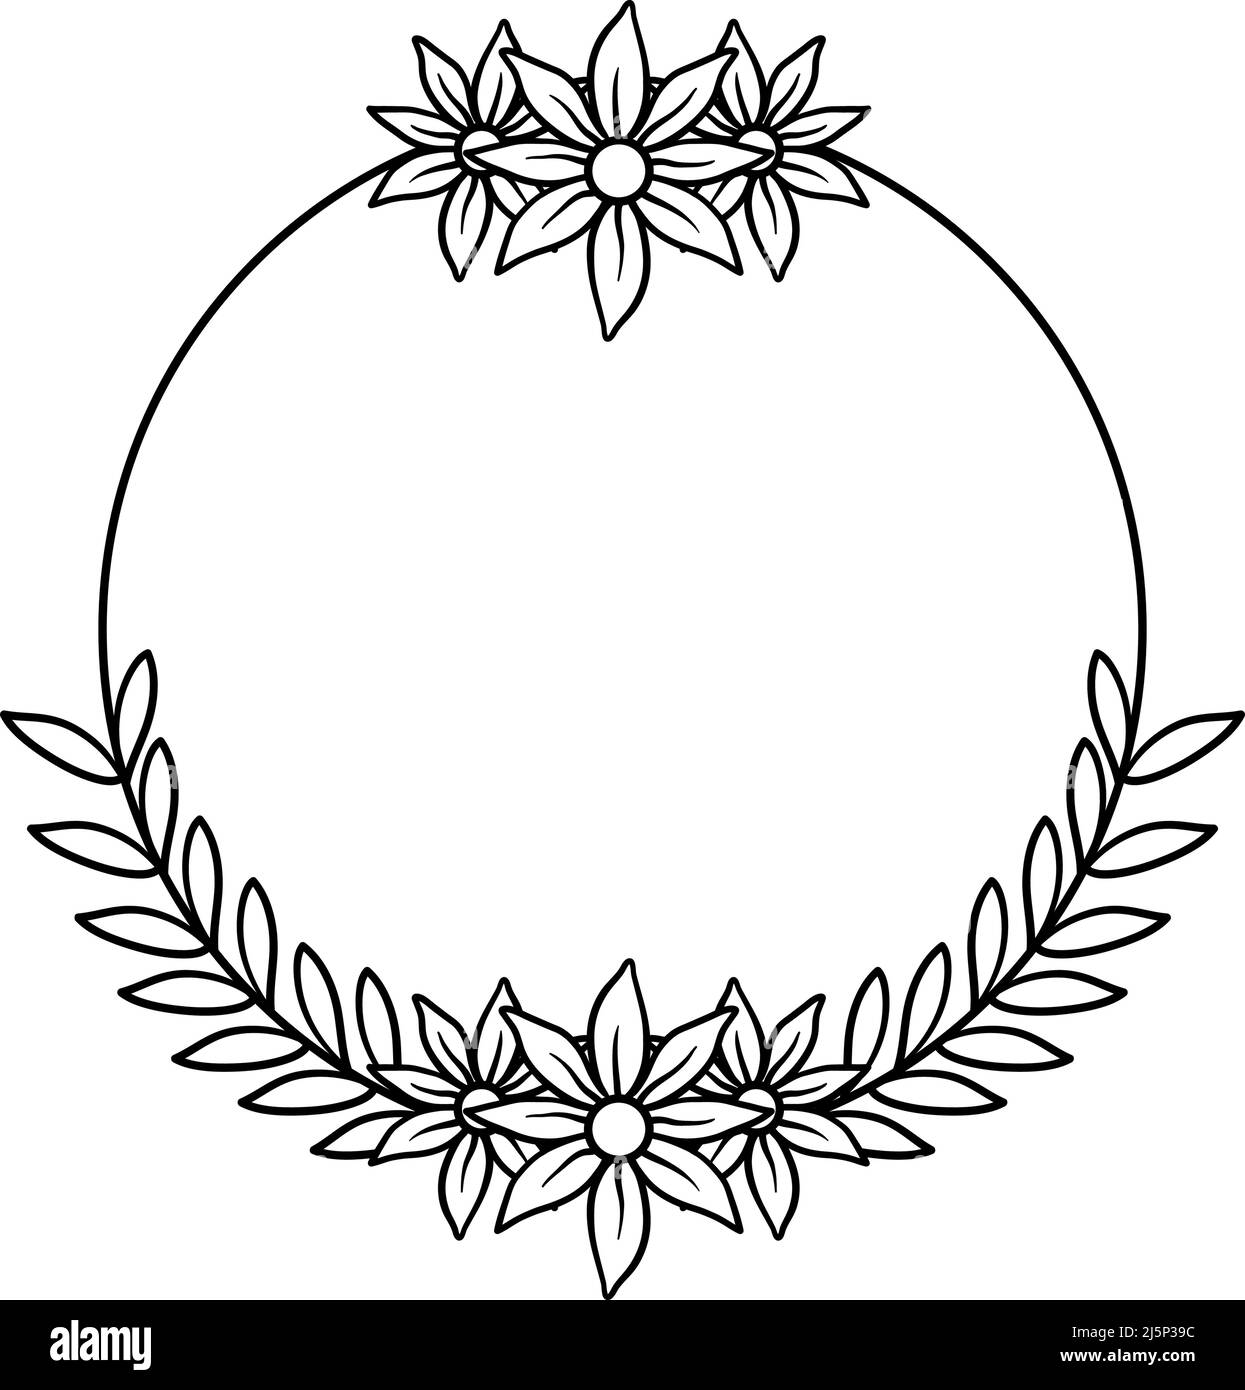 Floral frame circle outline icon design ilustration template vector Stock Vector